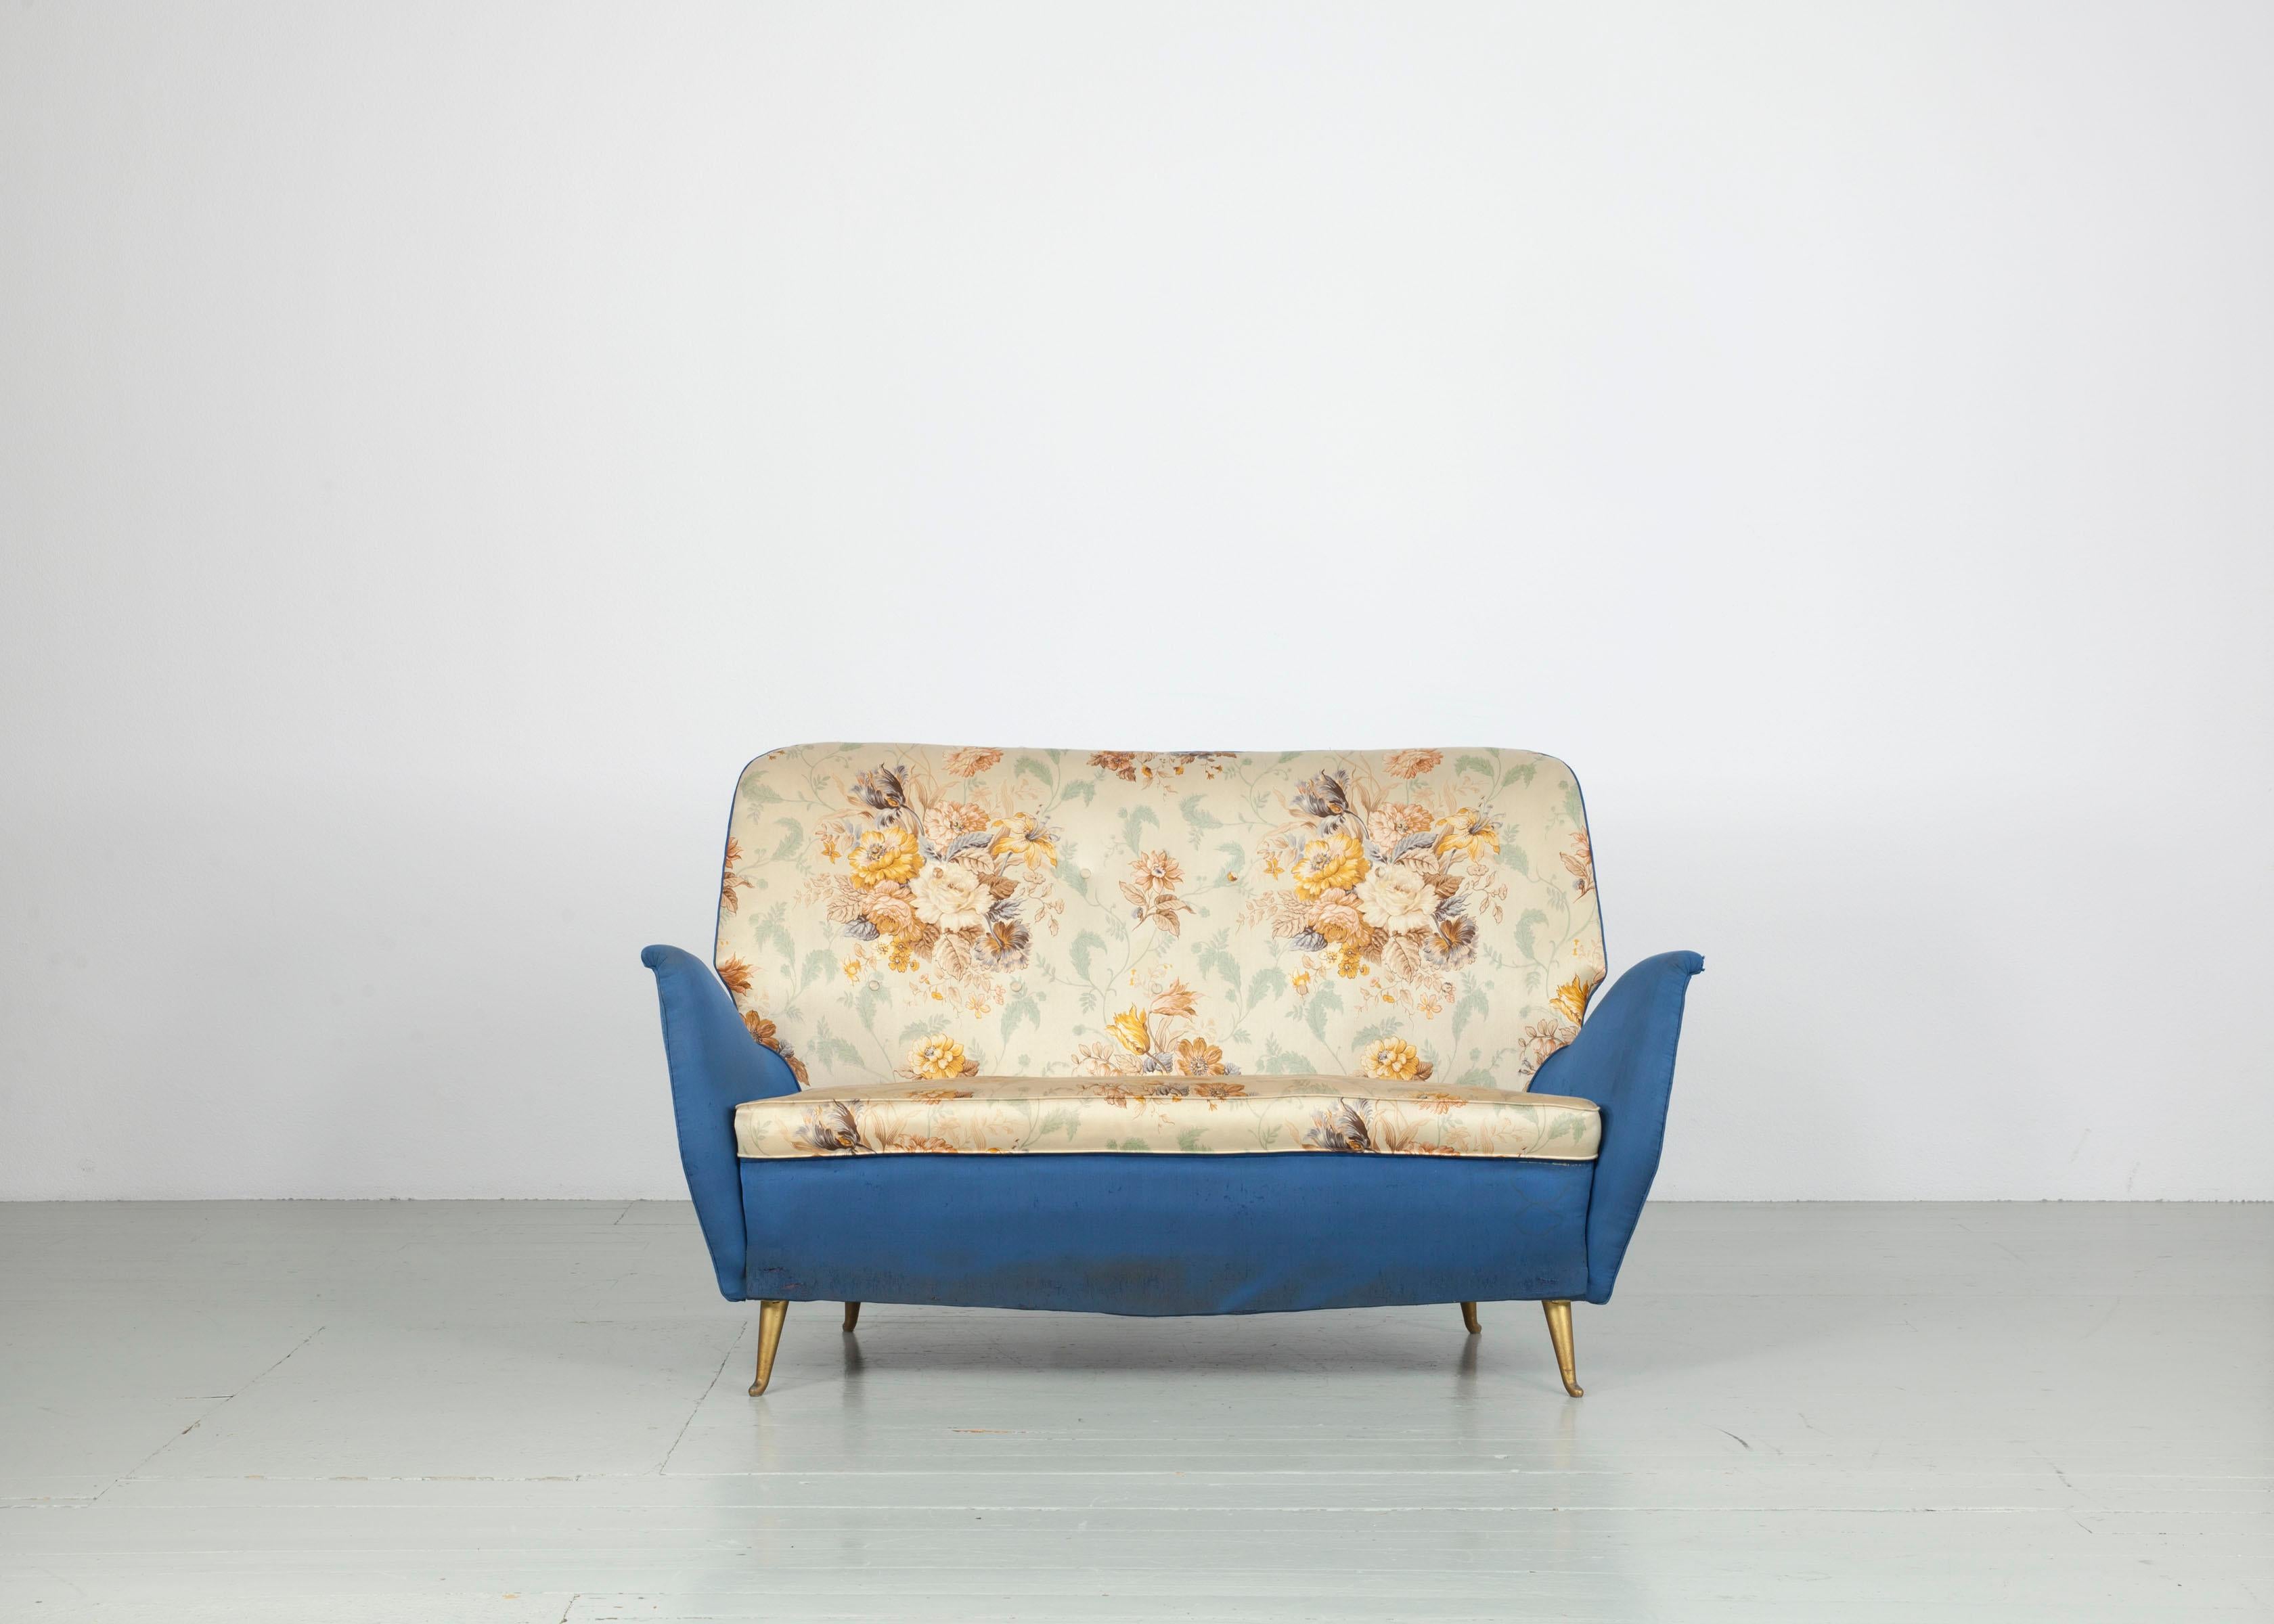 This sofa was made in Italy in the 1950s by I.S.A. Bergamo. The sofa is upholstered in blue fabric and cream fabric with a floral motif on the seat and backrest. The body of the piece of furniture rests on fine, golden iron casted legs. The sofa is